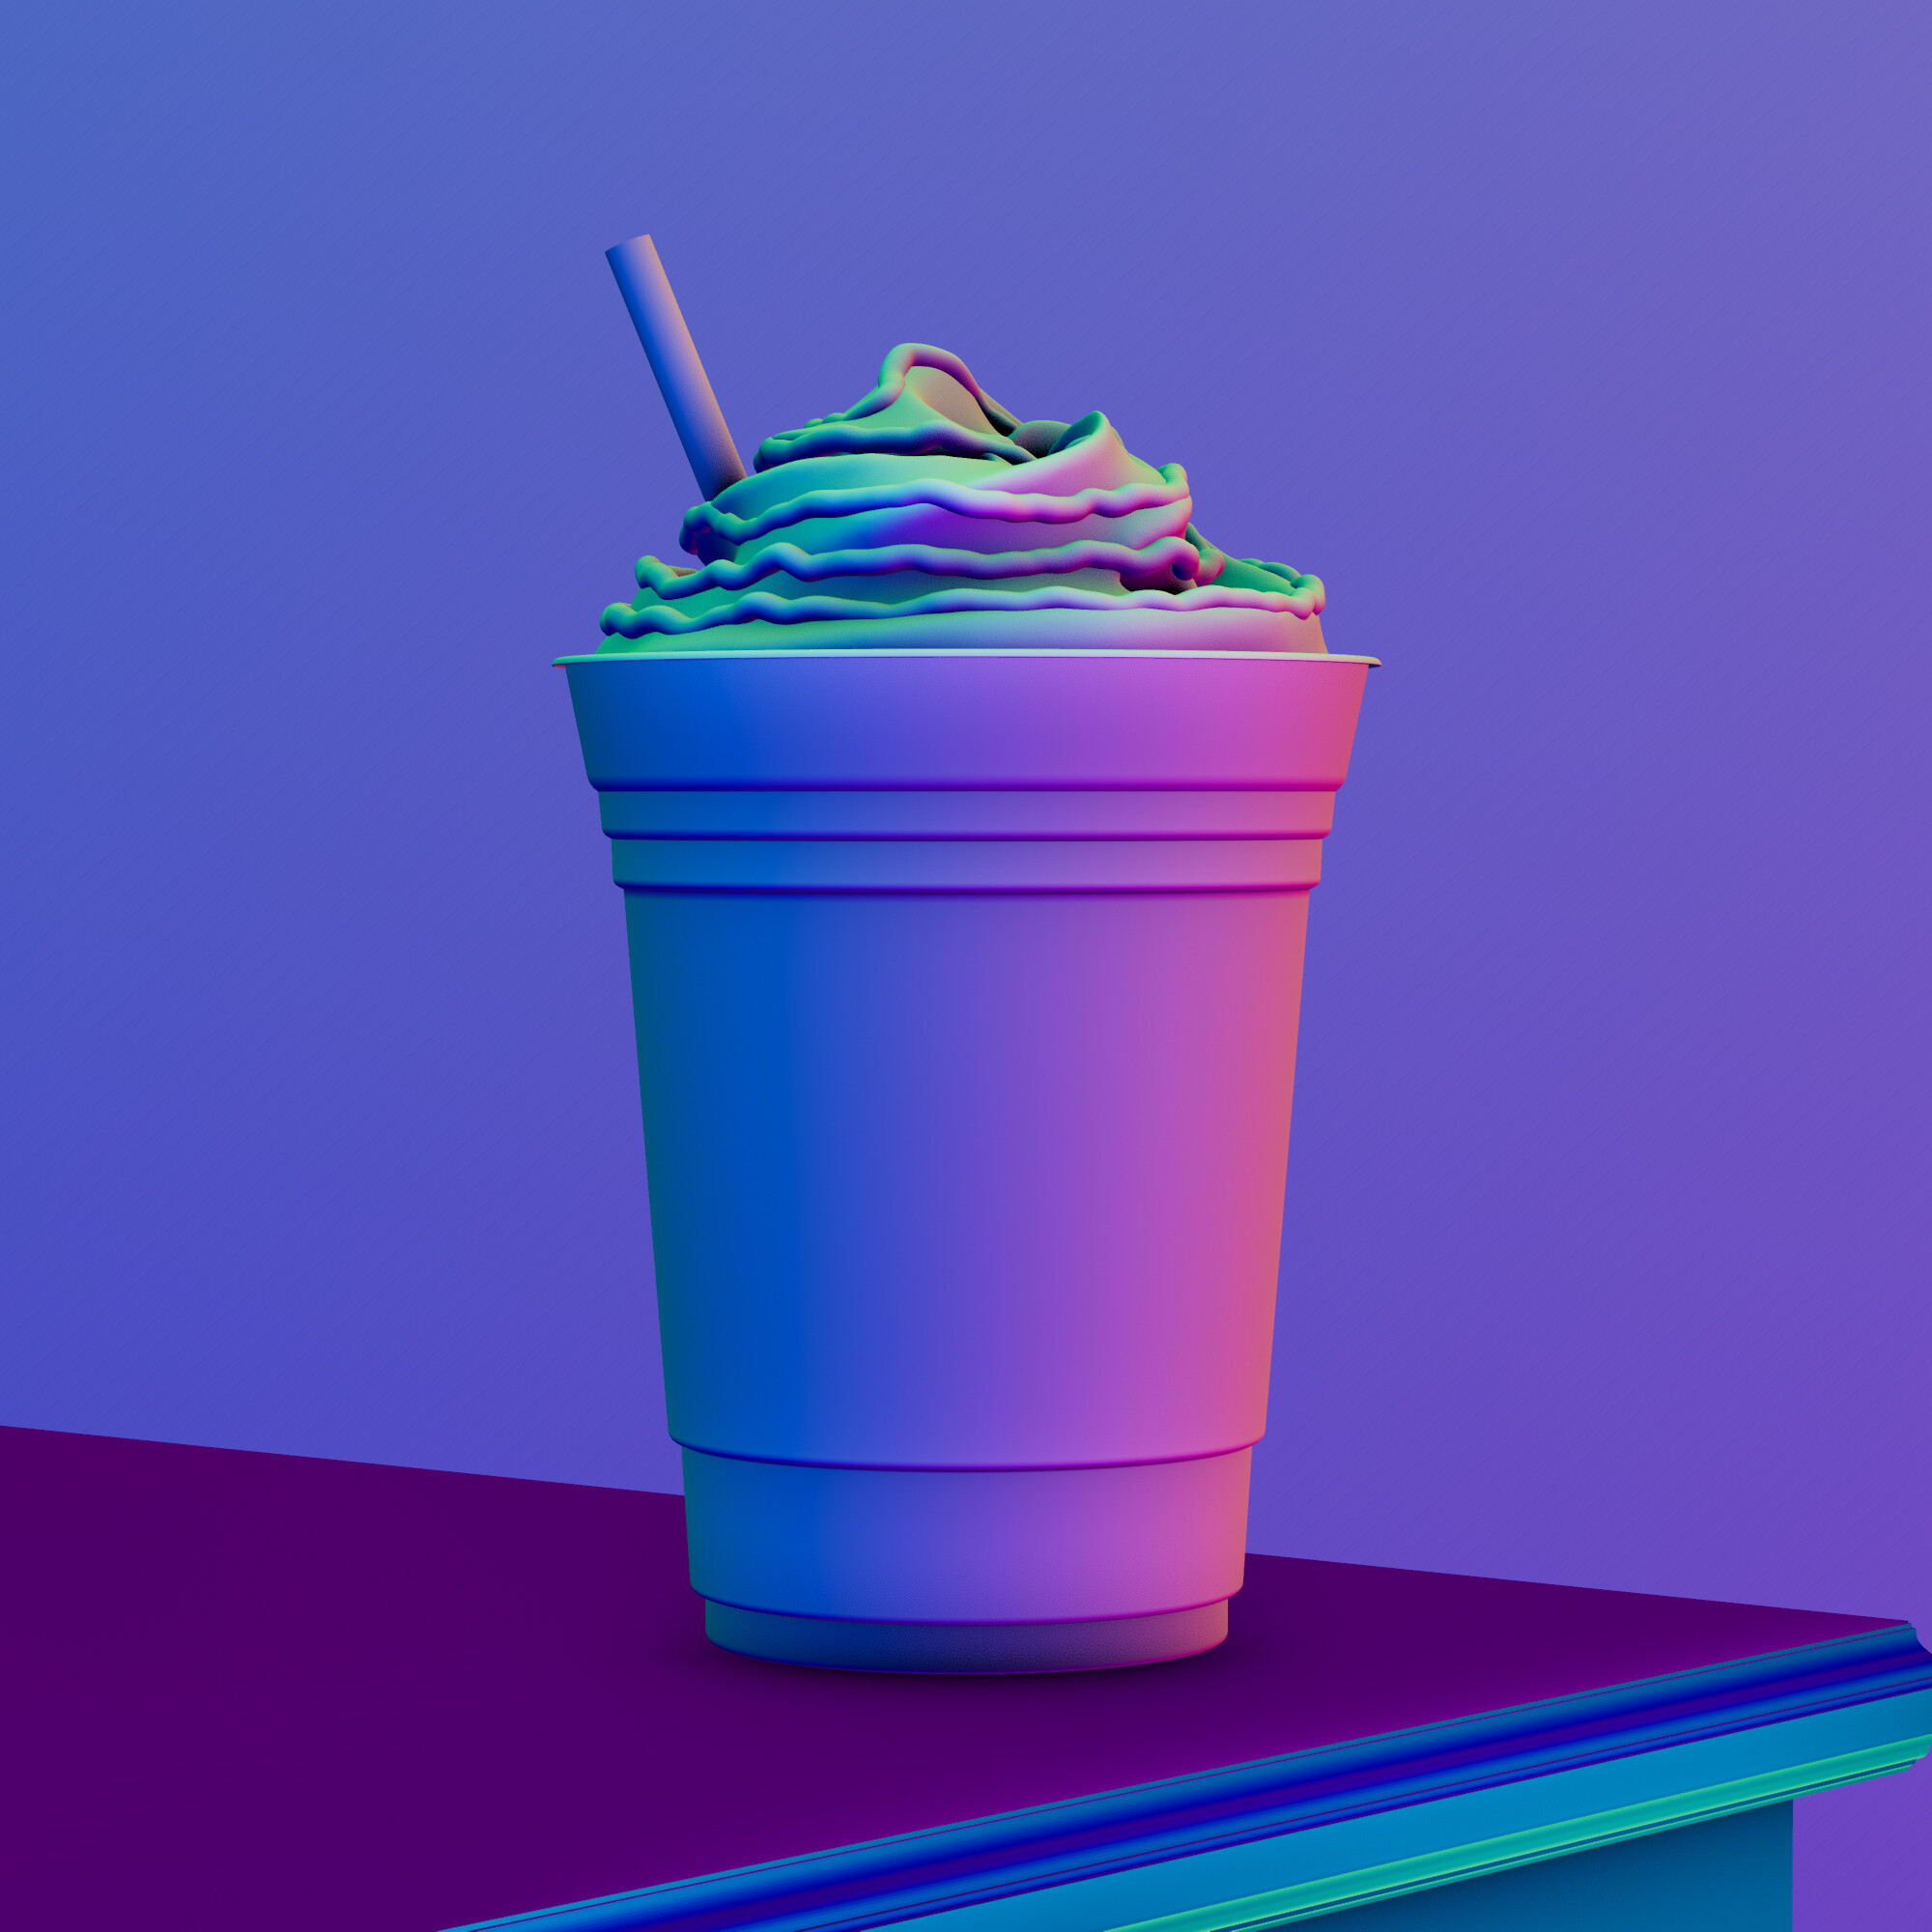 Chocolate shake - Finished Projects - Blender Artists Community